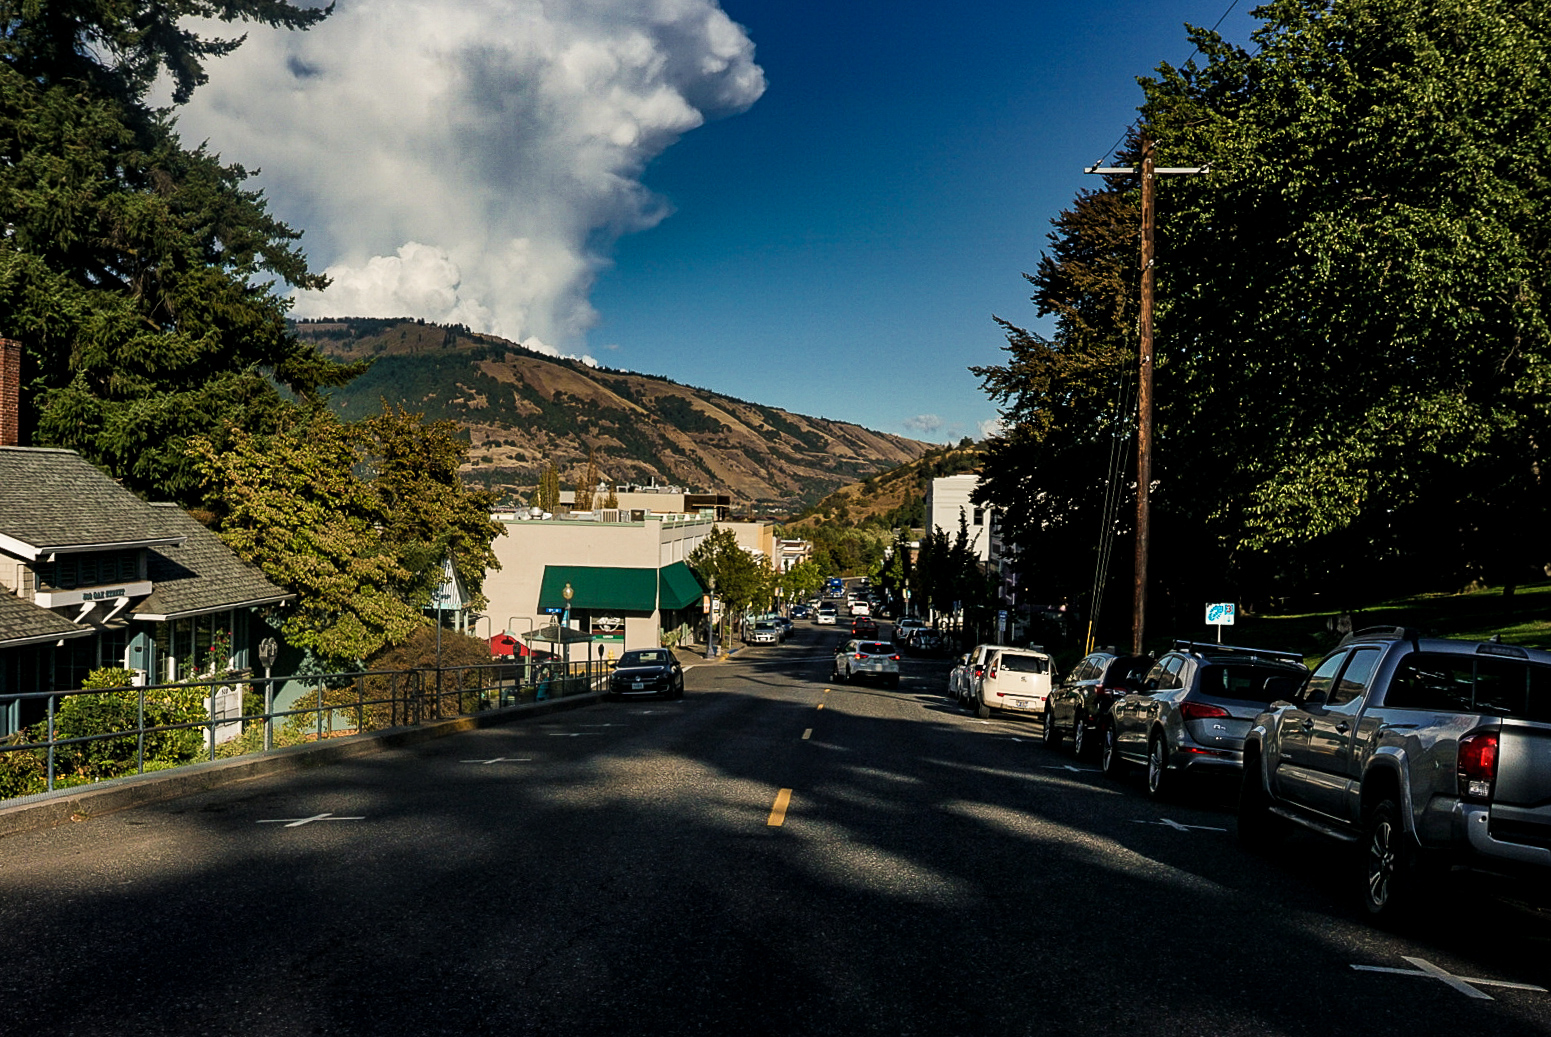 A street view of Downtown Hood river